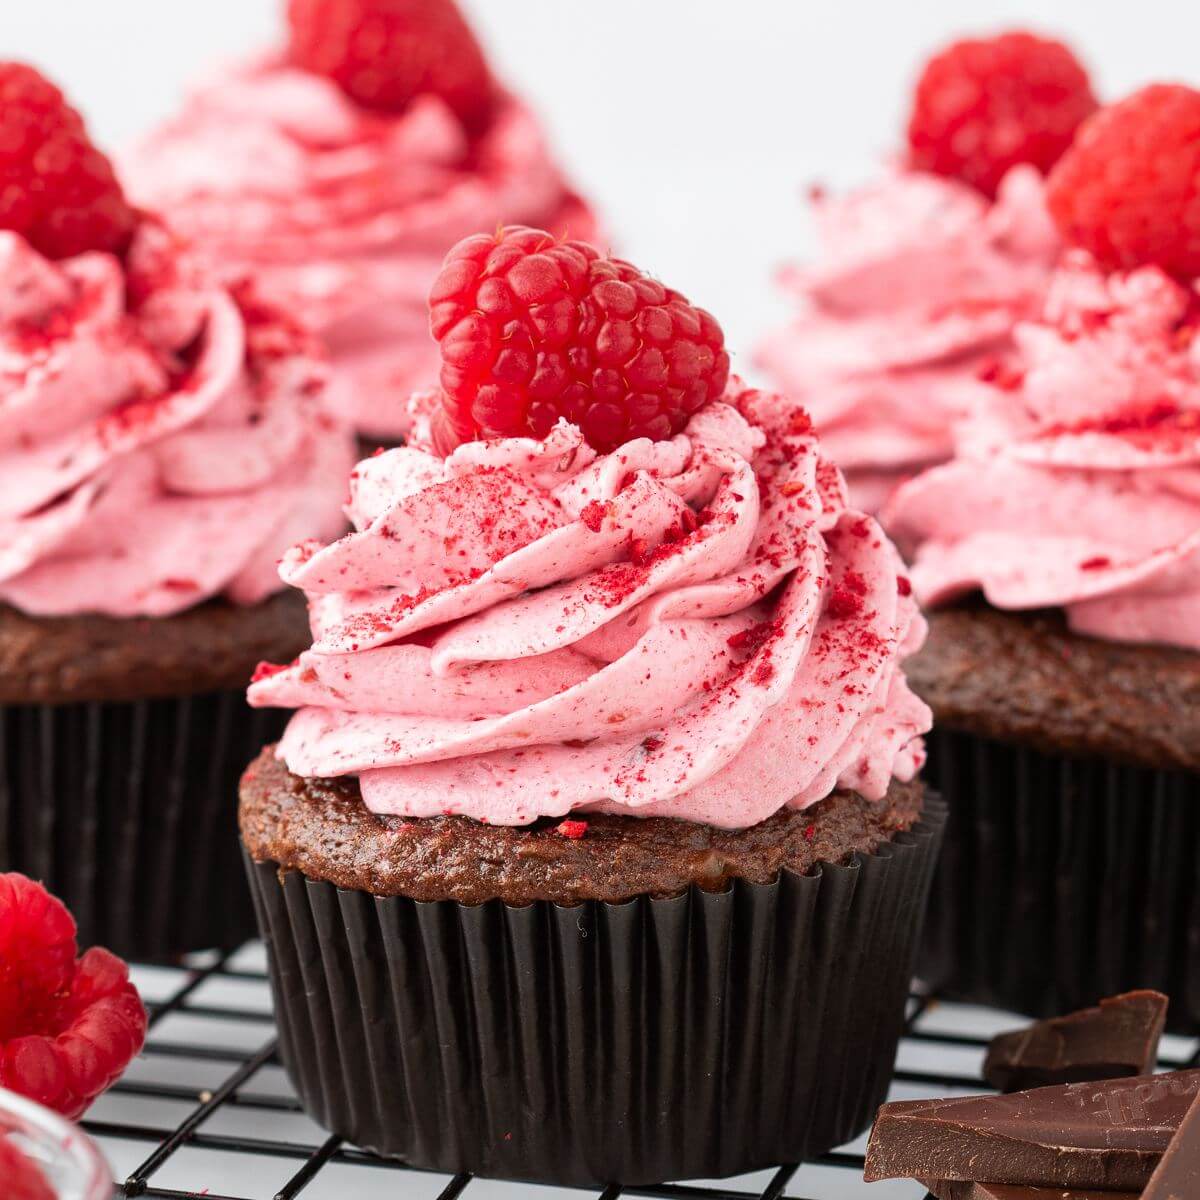 Five cupcakes topped with pink thick icing, red sprinkles, and raspberries sit on a wire rack.